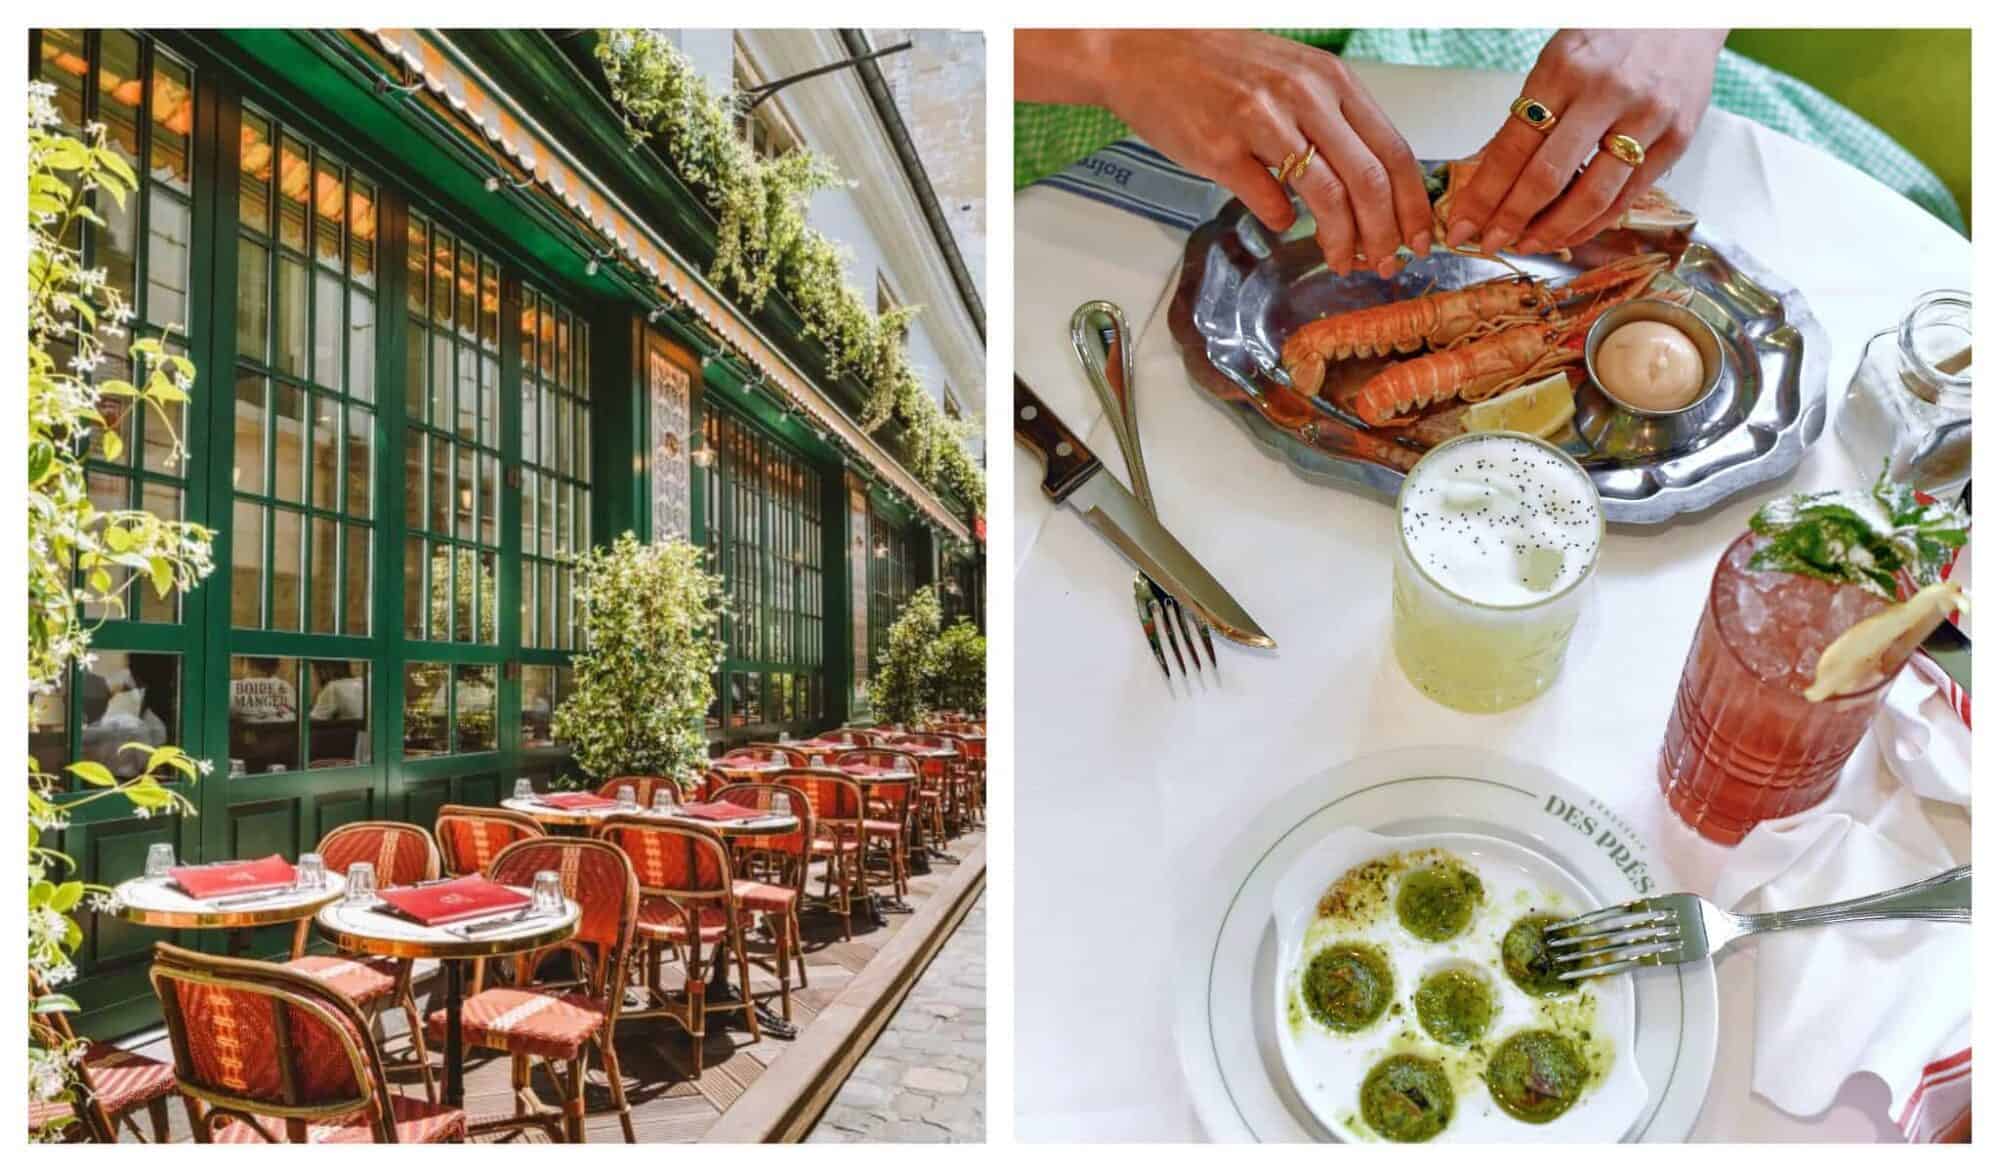 Left: The rooftop terrace of Brasserie des Prés in Paris with red chairs; Right: A table at Brasserie des Prés with shrimp and escargot appetizer plates.